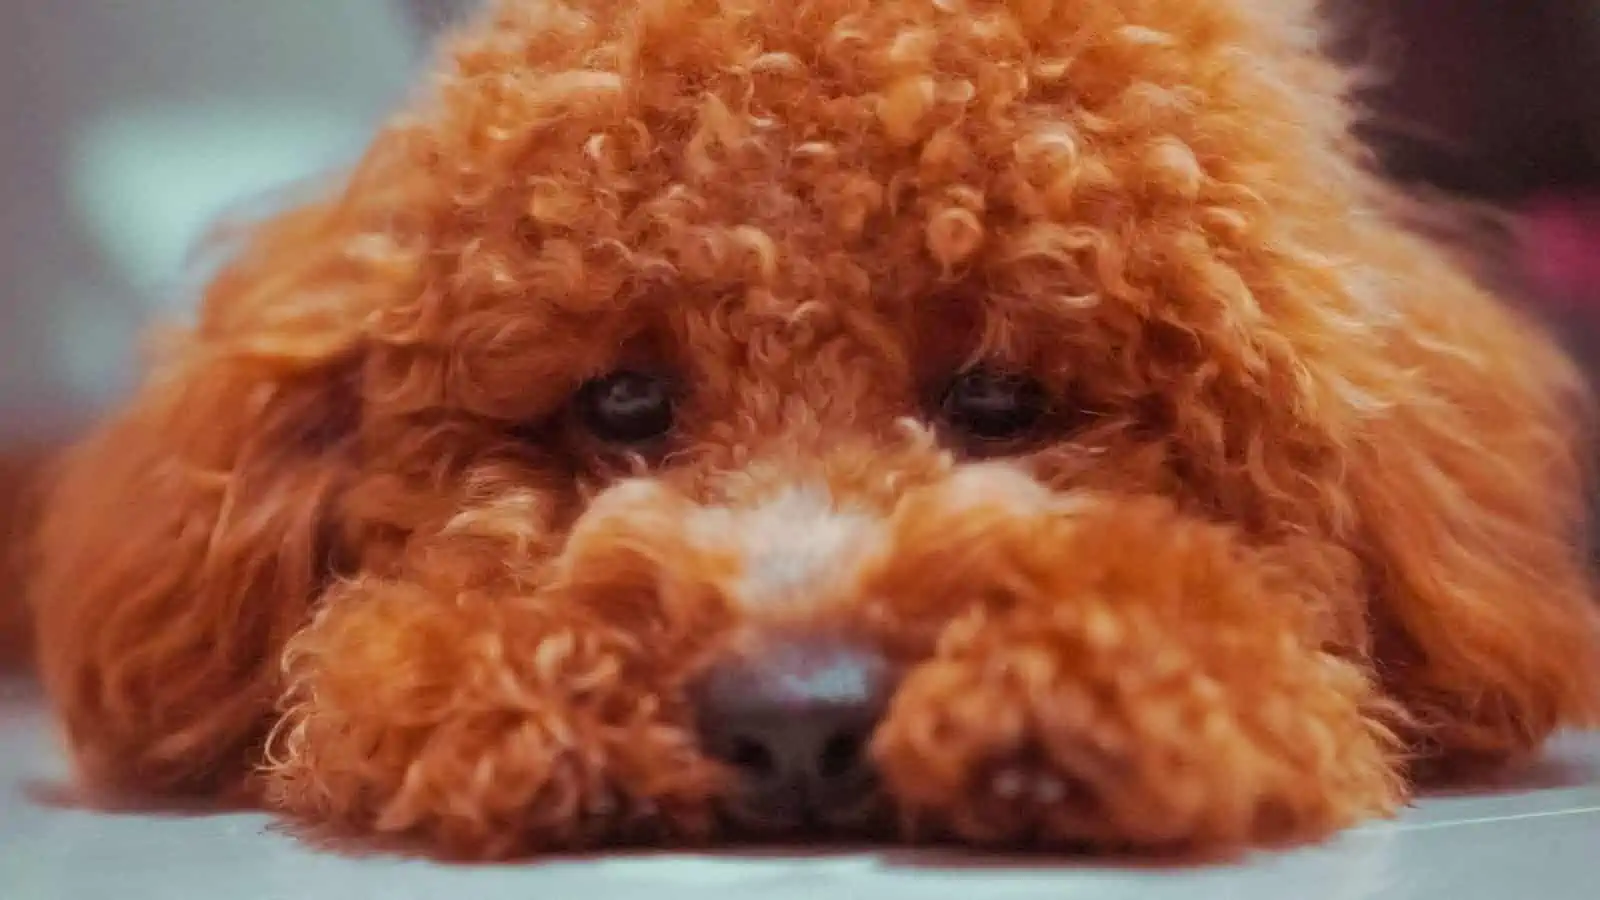 a close up of a tired red poodle toy unsplash